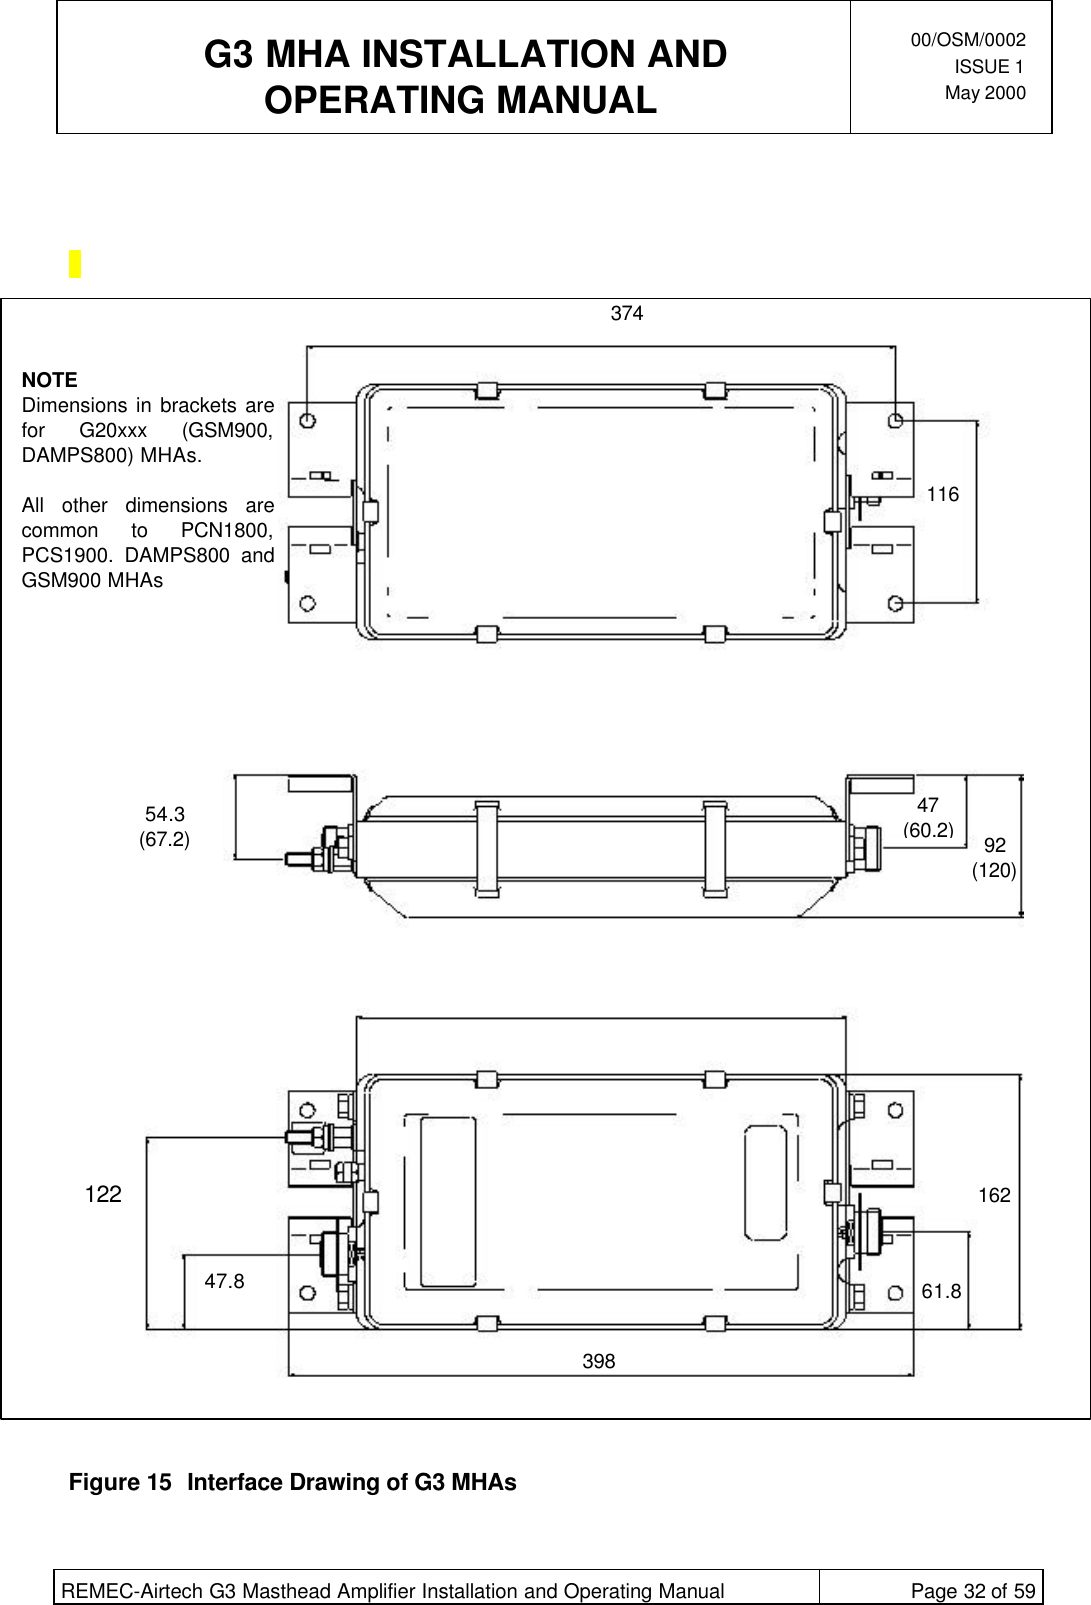  G3 MHA INSTALLATION ANDOPERATING MANUAL00/OSM/0002ISSUE 1May 2000REMEC-Airtech G3 Masthead Amplifier Installation and Operating Manual Page 32 of 59Figure 15 Interface Drawing of G3 MHAs37411654.3(67.2)47(60.2)92(120)16261.839847.8122NOTEDimensions in brackets arefor G20xxx (GSM900,DAMPS800) MHAs.All other dimensions arecommon to PCN1800,PCS1900. DAMPS800 andGSM900 MHAs